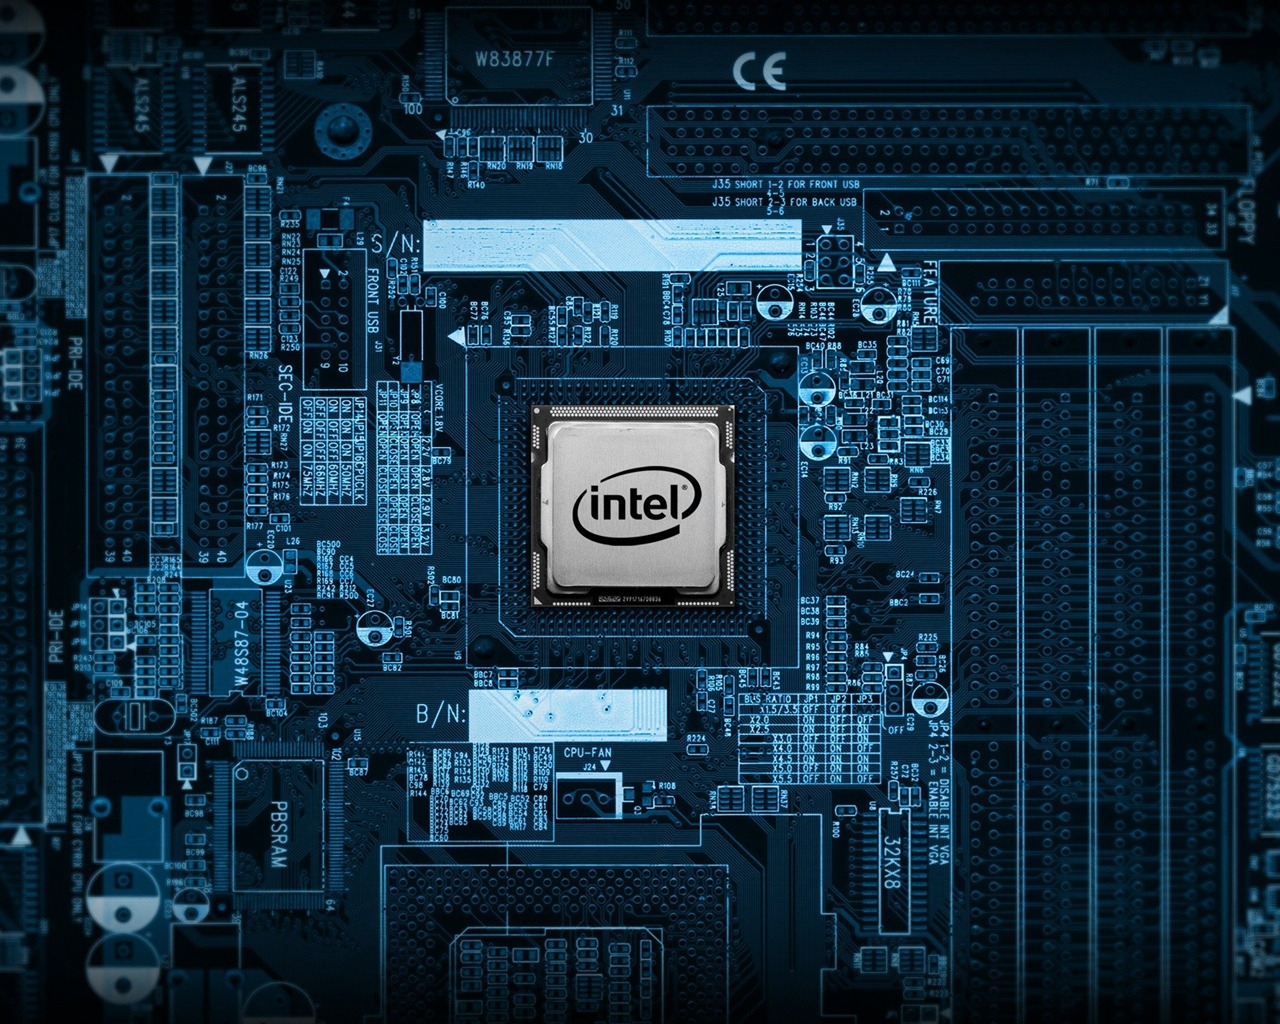 Intel CPU for 1280 x 1024 resolution